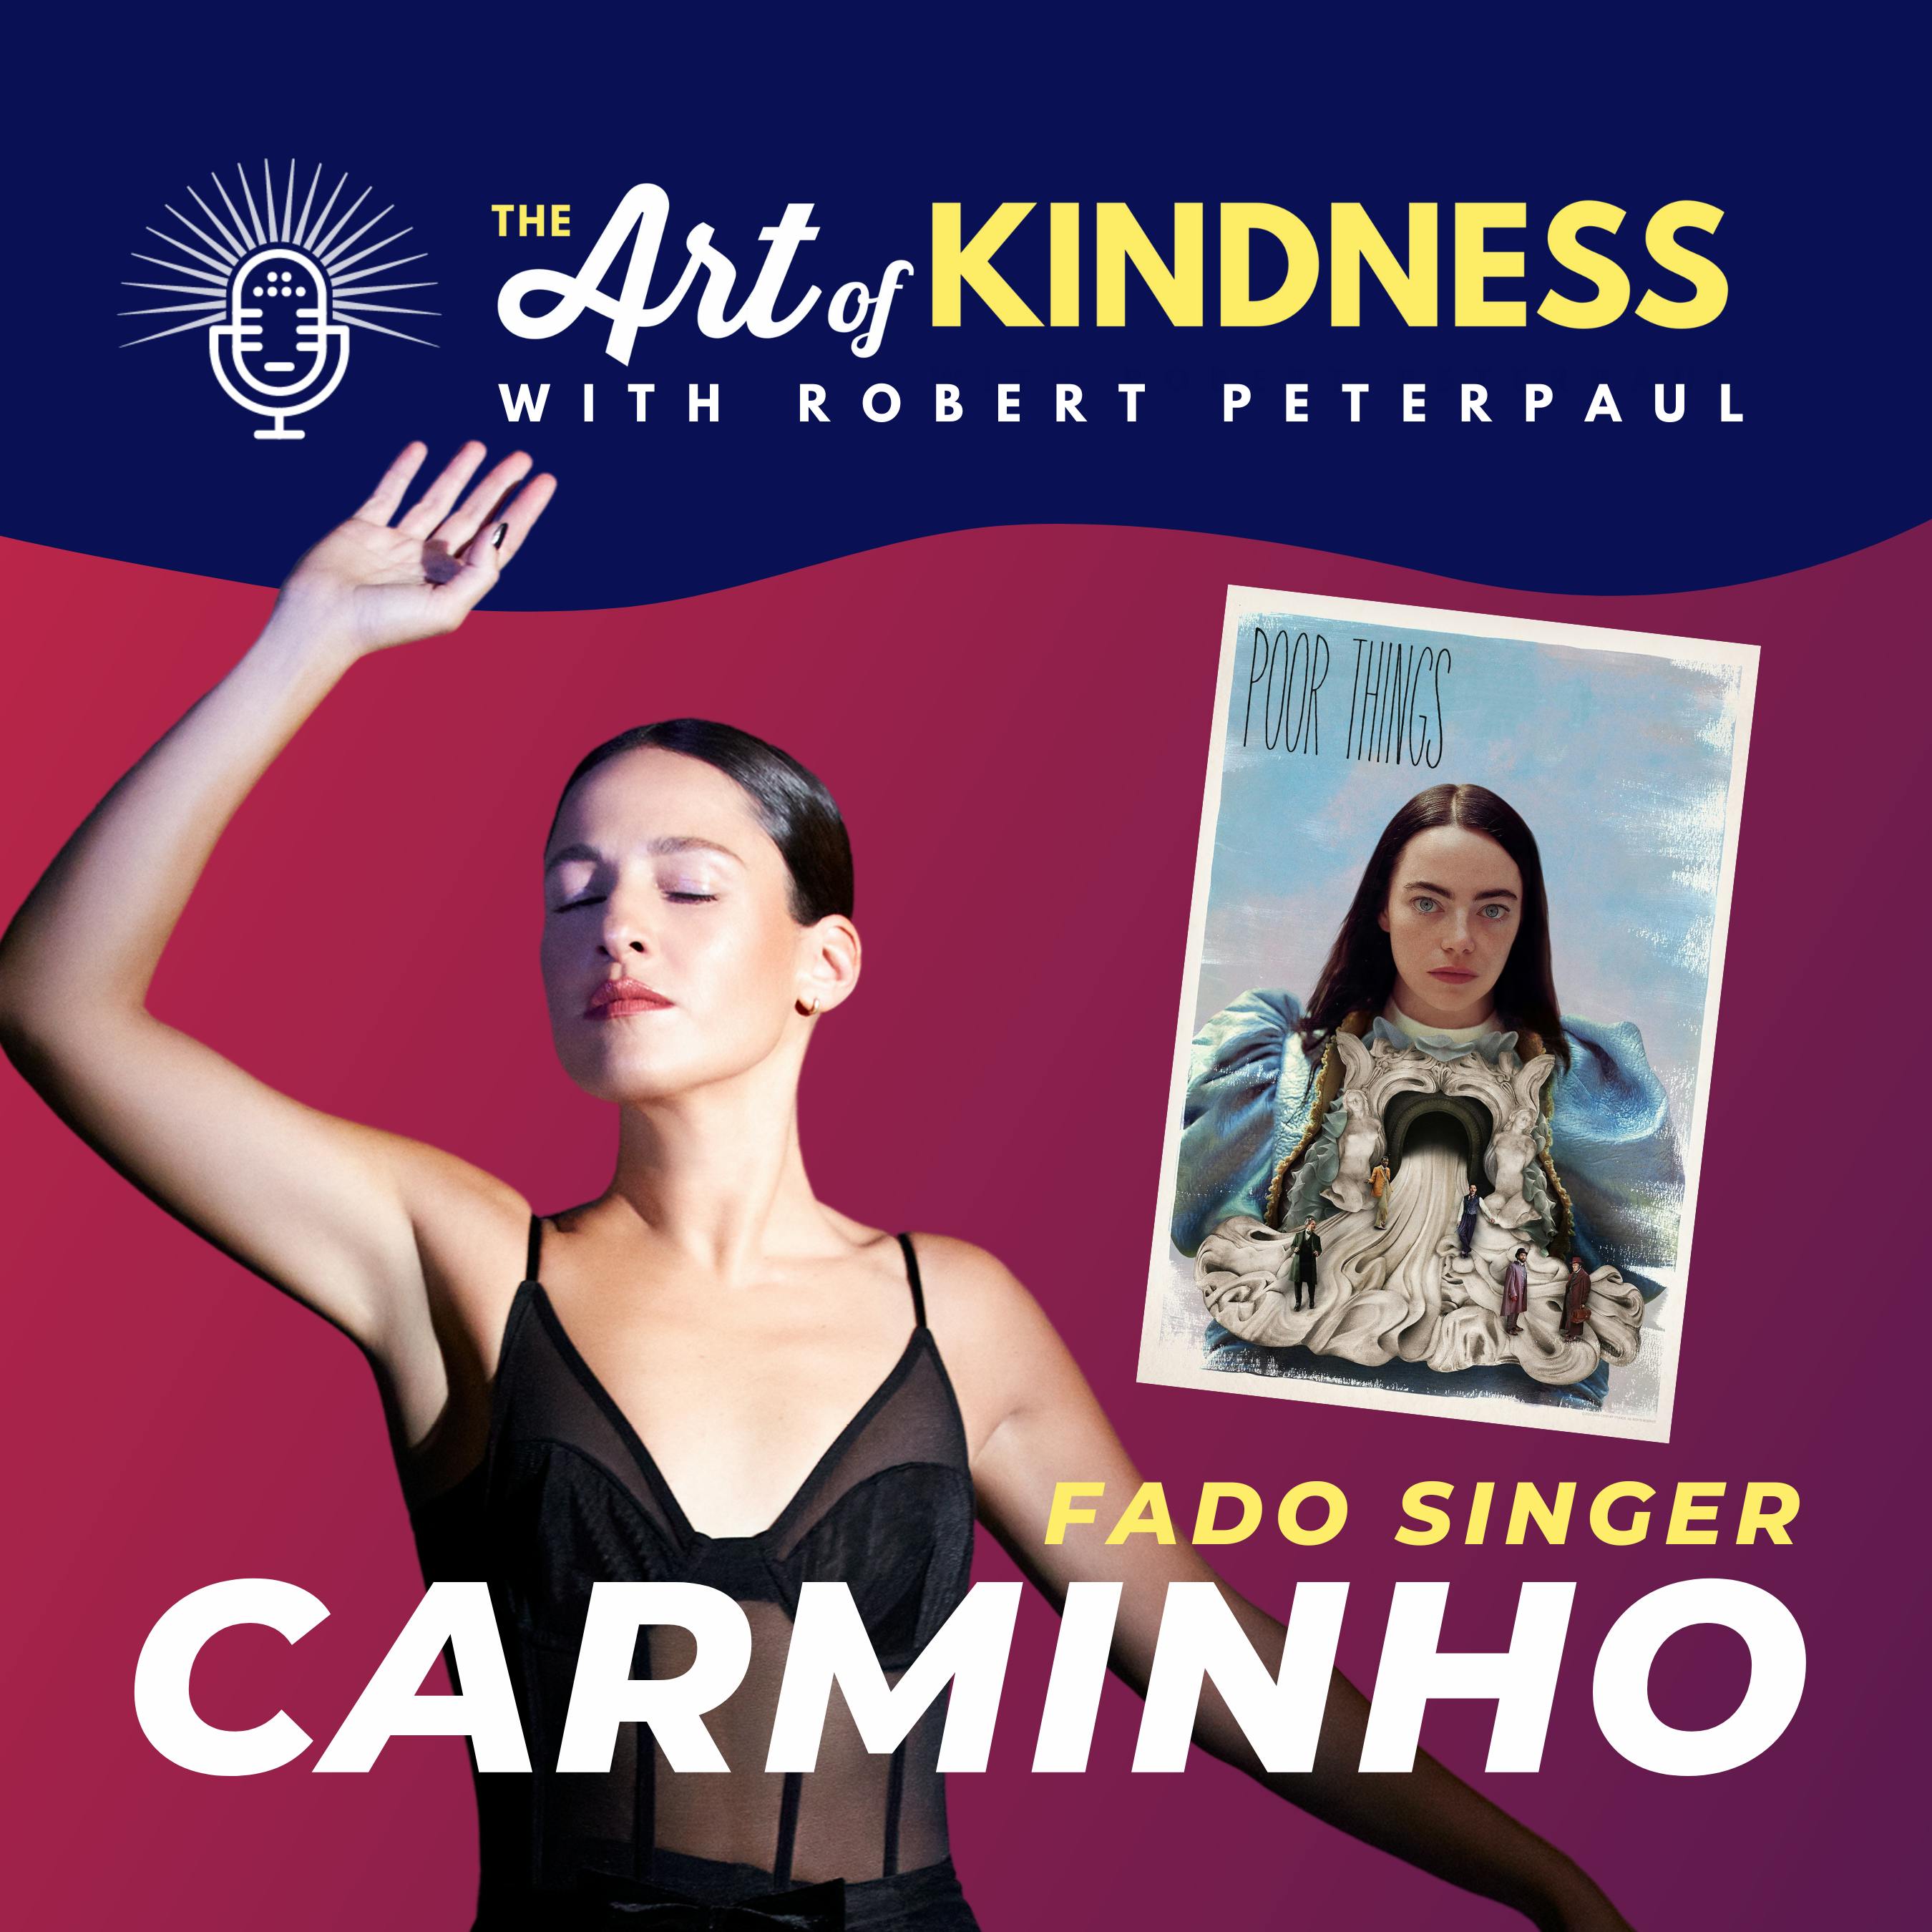 ’Poor Things’ Singer Carminho: Kindness is the Perfume of a Good Person